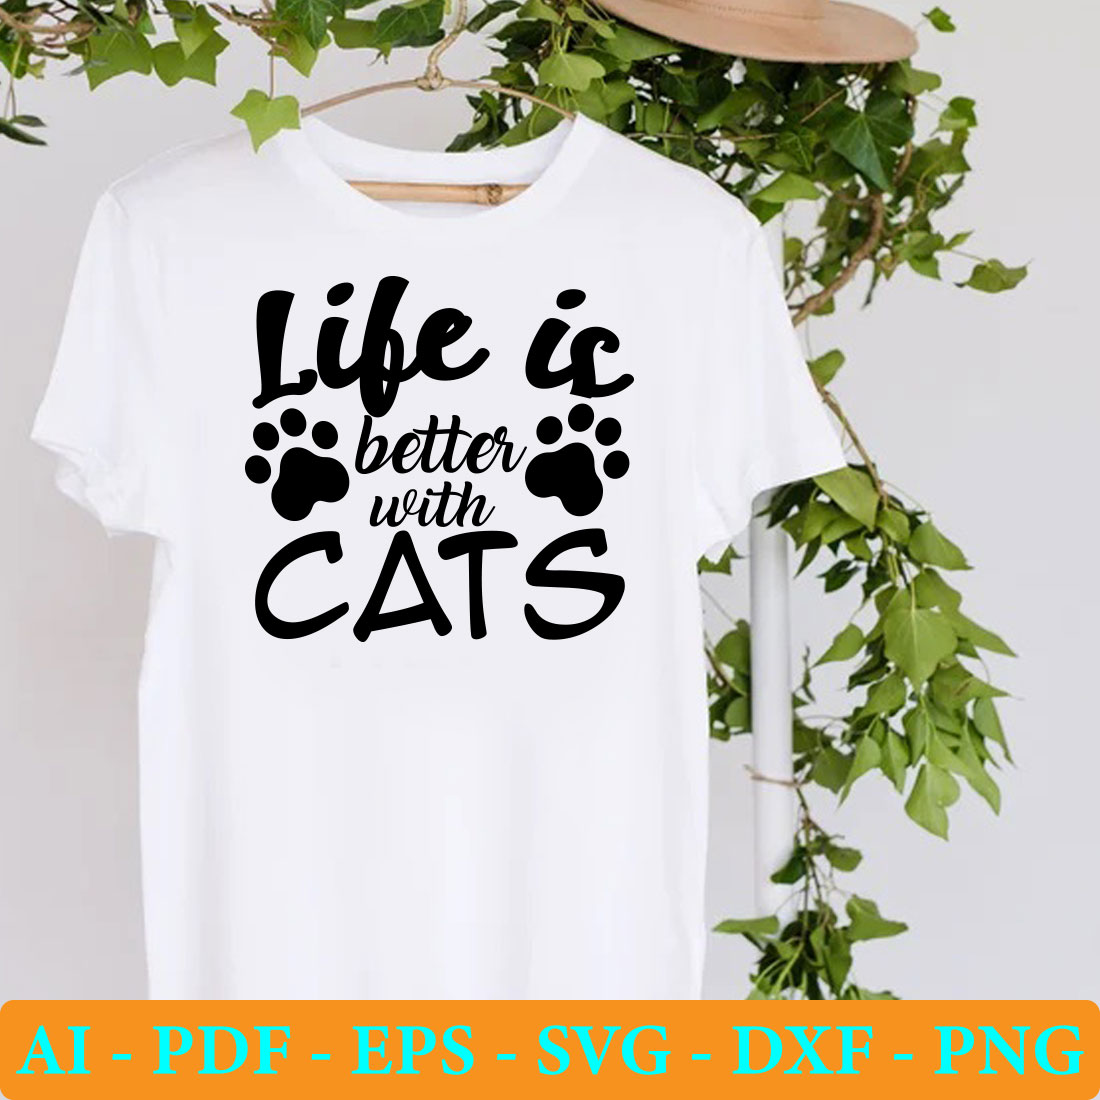 T - shirt that says life is better with cats.